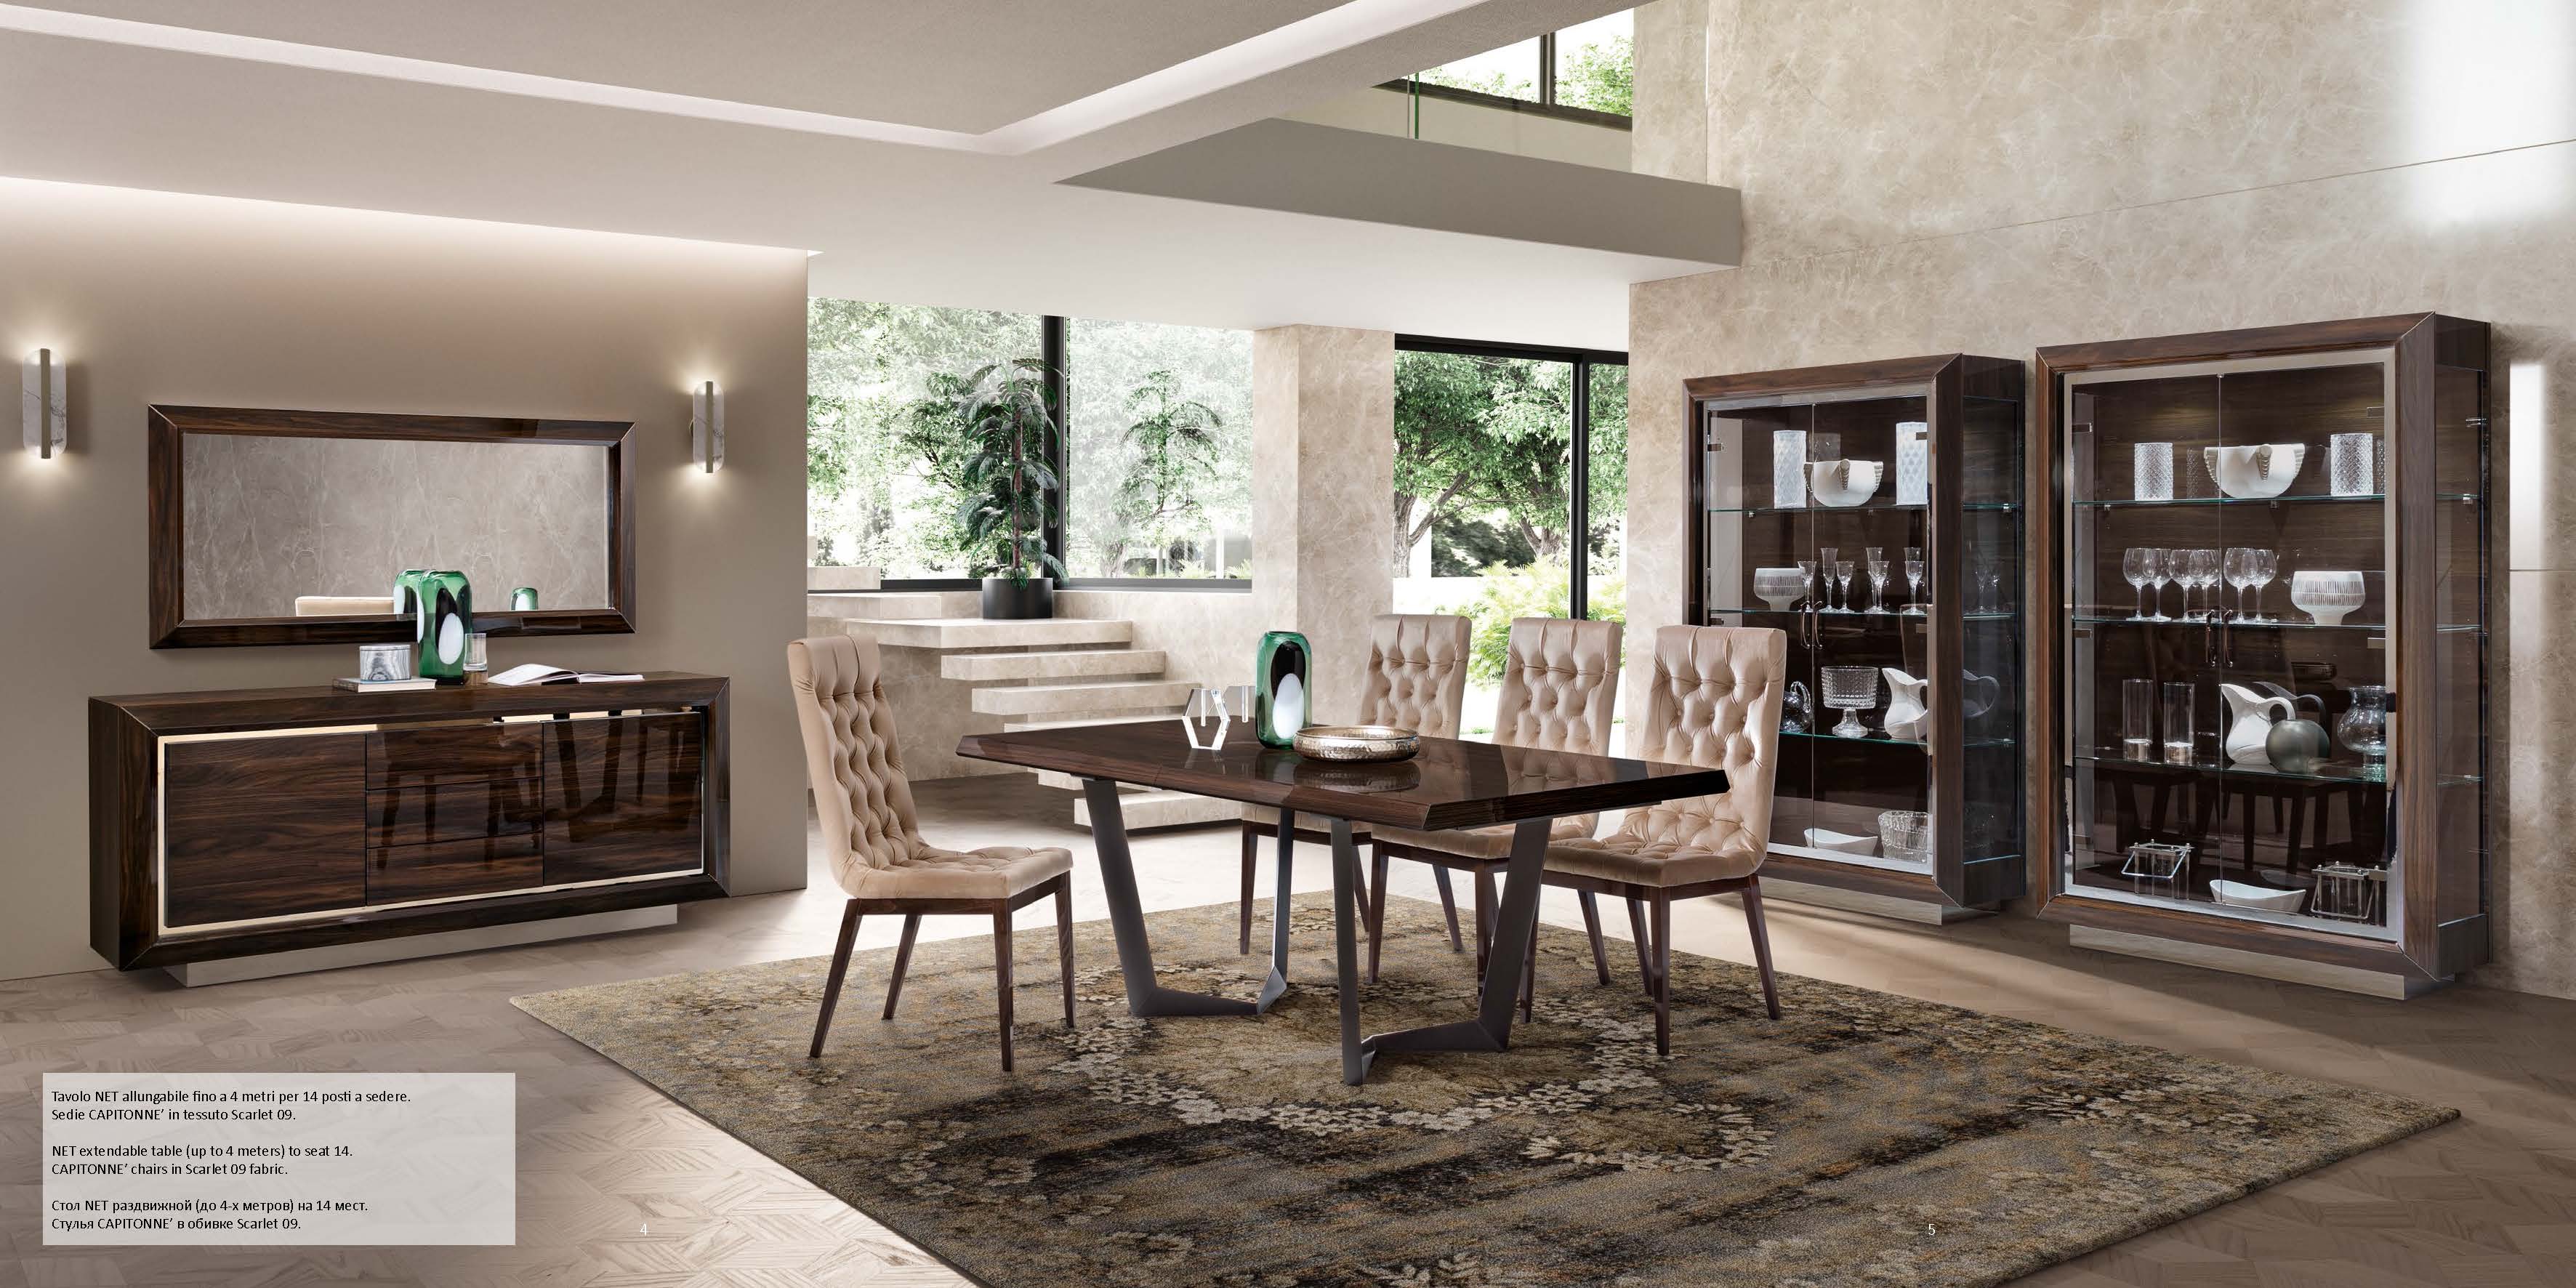 Brands Camel Gold Collection, Italy Elite Day Walnut Dining Additional items